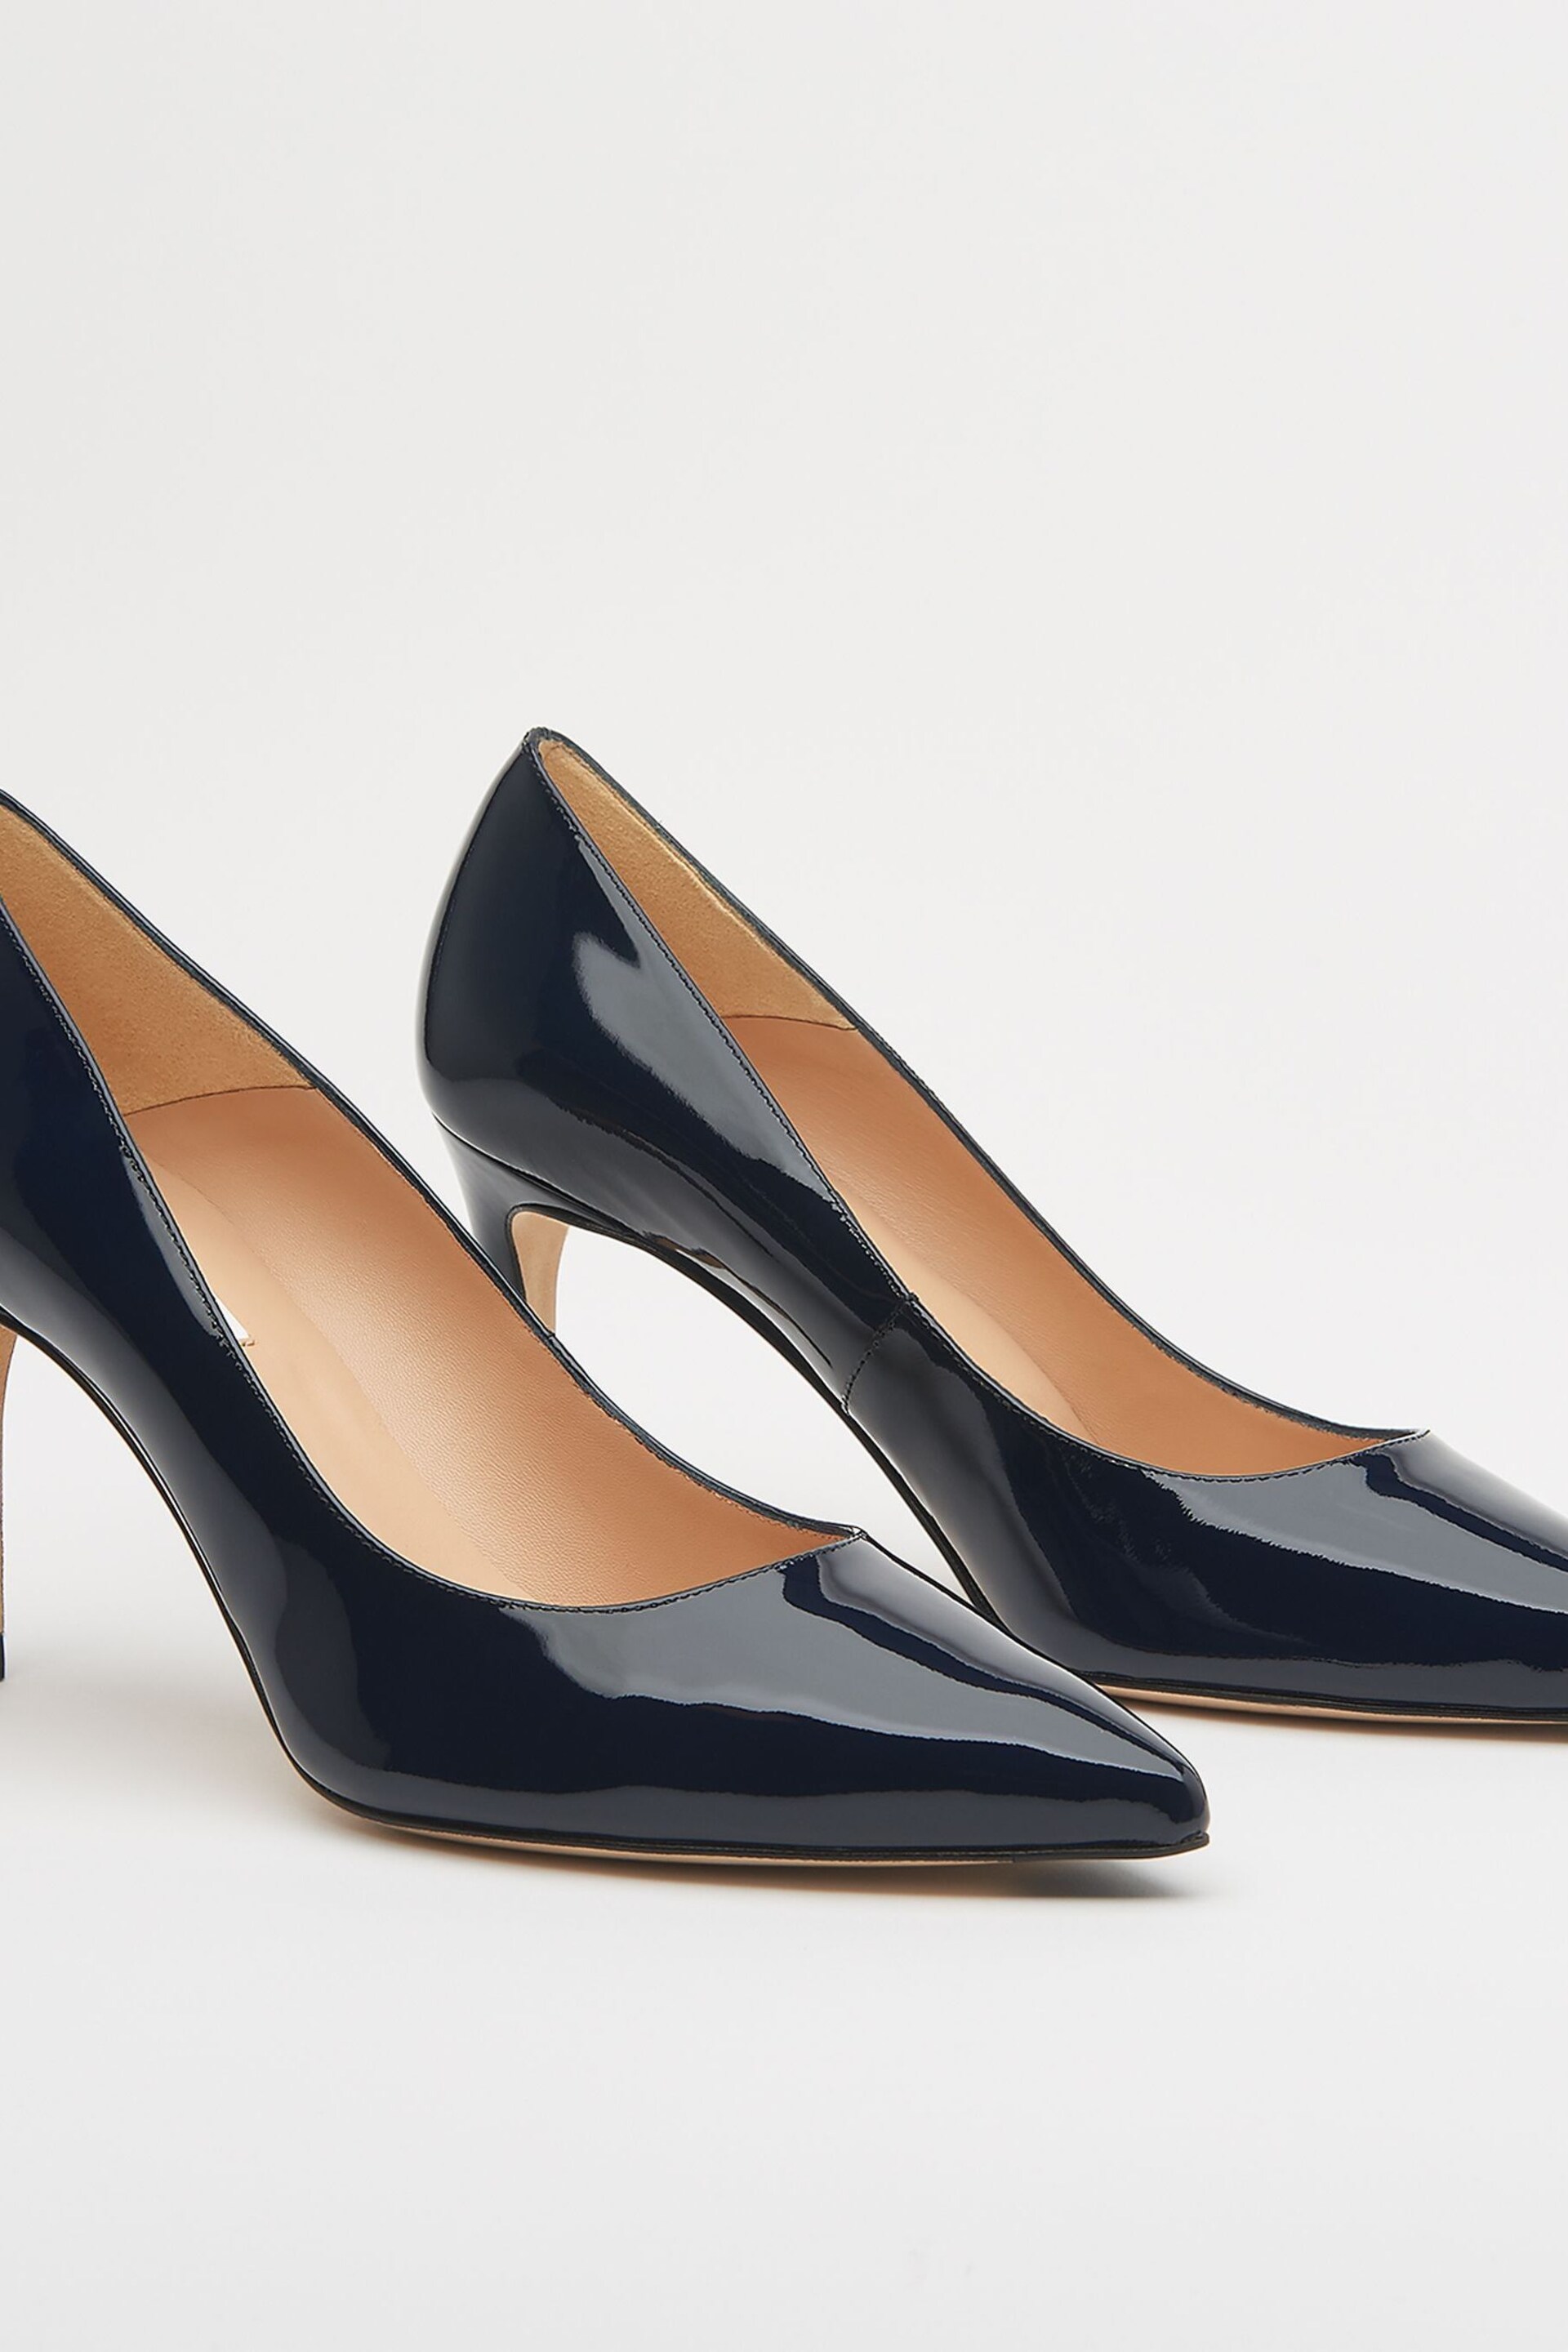 LK Bennett Floret Patent Leather Pointed Toe Courts - Image 2 of 4